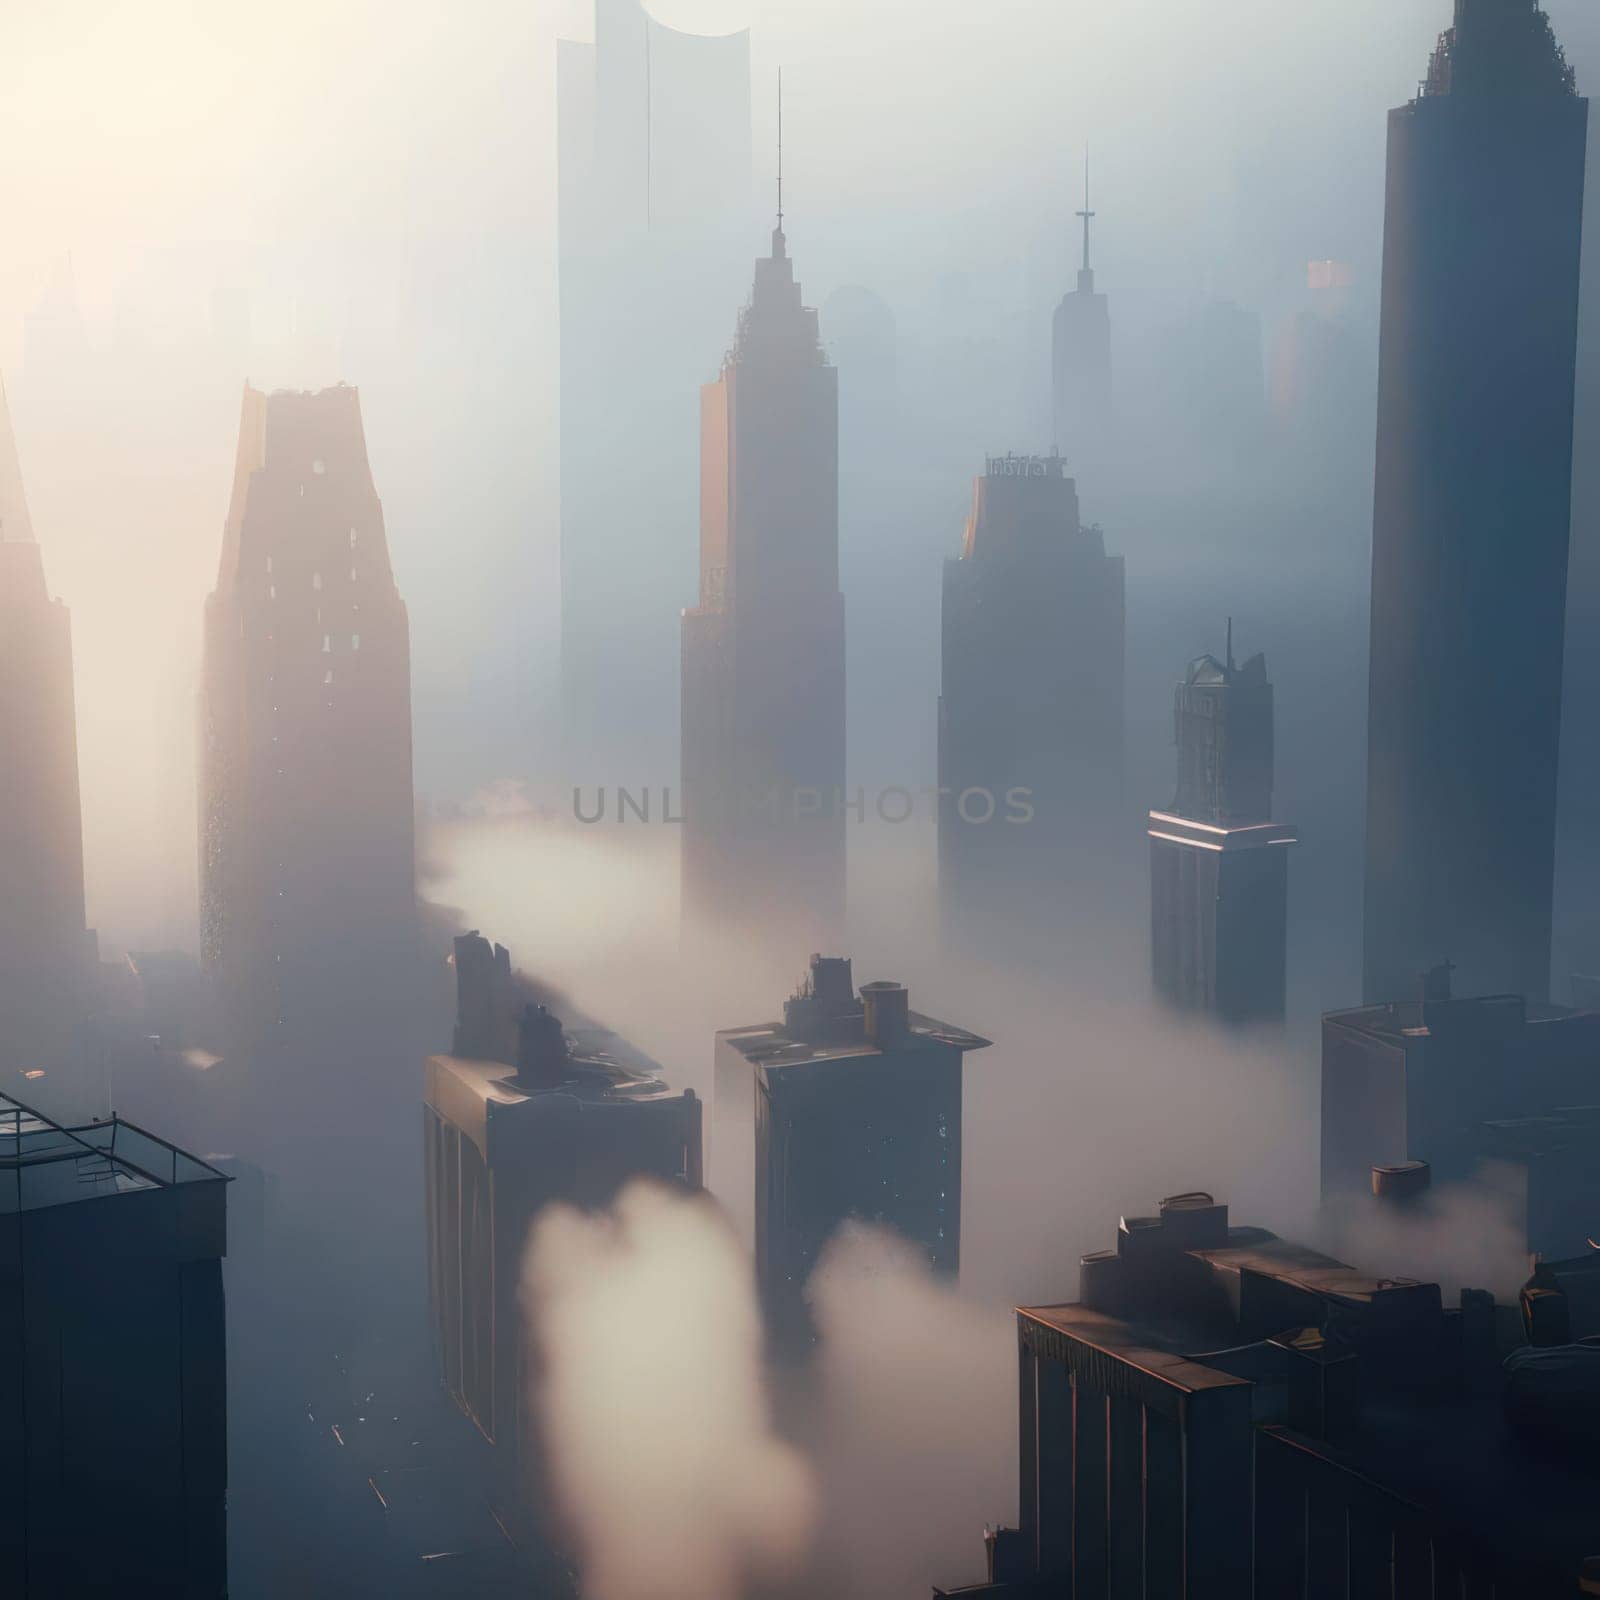 A city in the fog by nolimit046